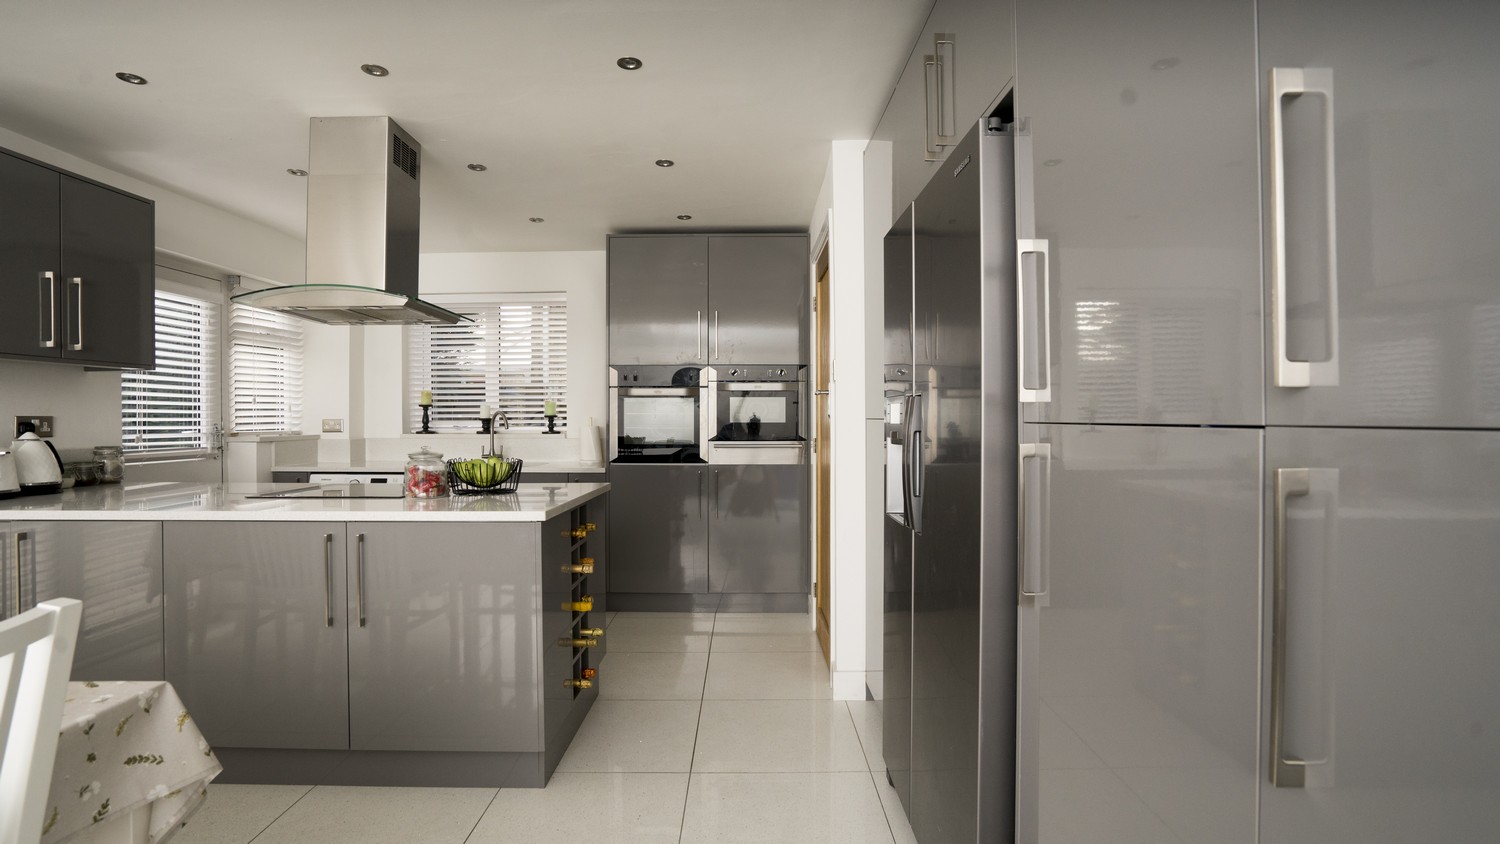 Grey gloss wine racks have also been installed in this family kitchen as shown at the end of the island.